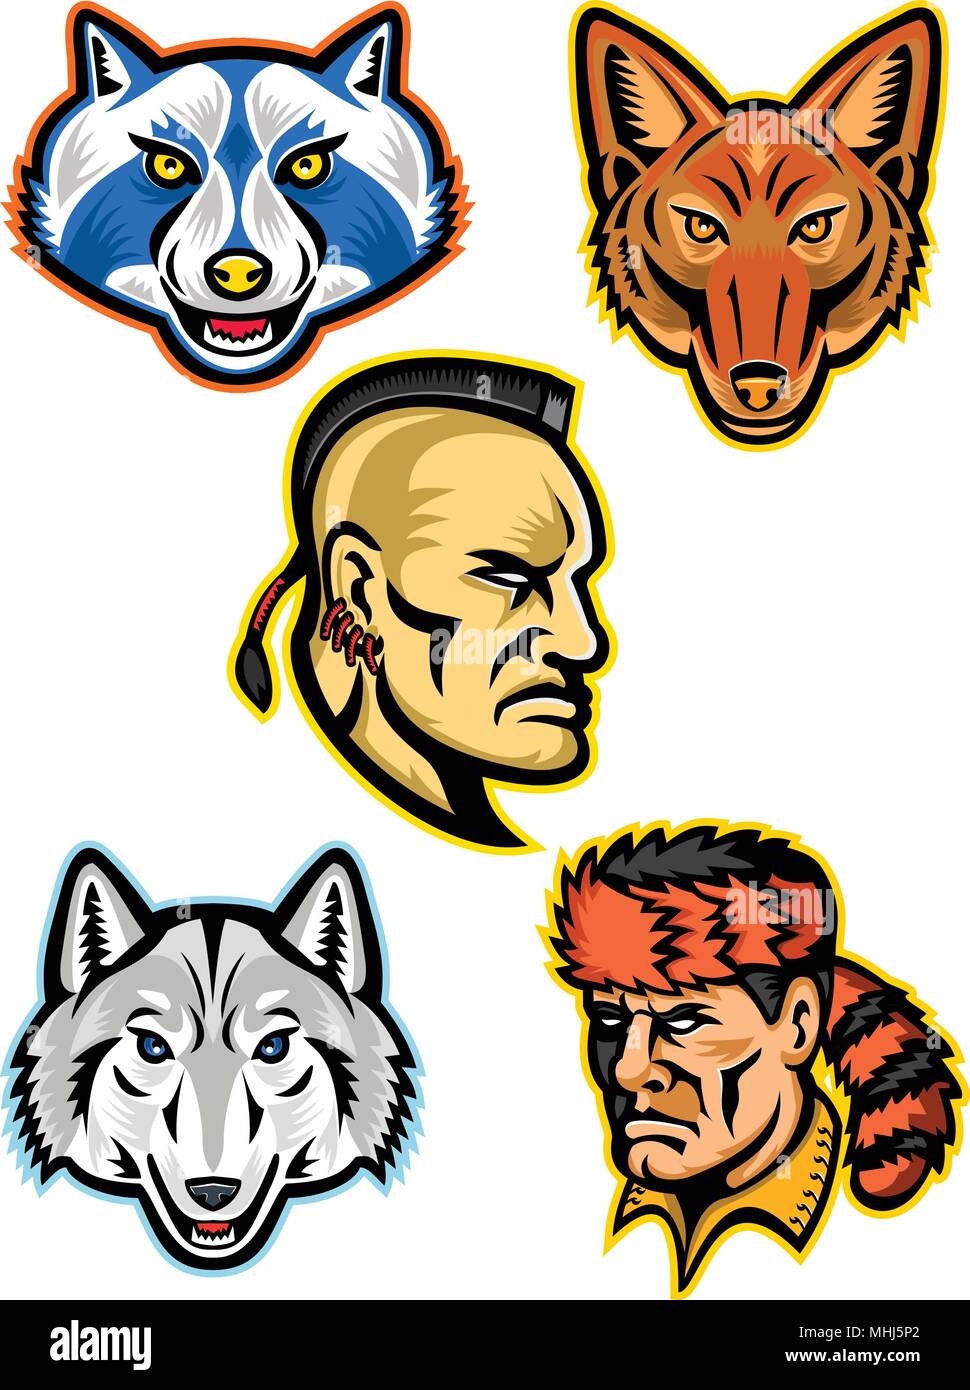 Mascot icon illustration set of heads of American wildlife and folklore heroes like the Artic wolf, jackal, Mohawk warrior, raccoon and Davy Crockett, Stock Vector